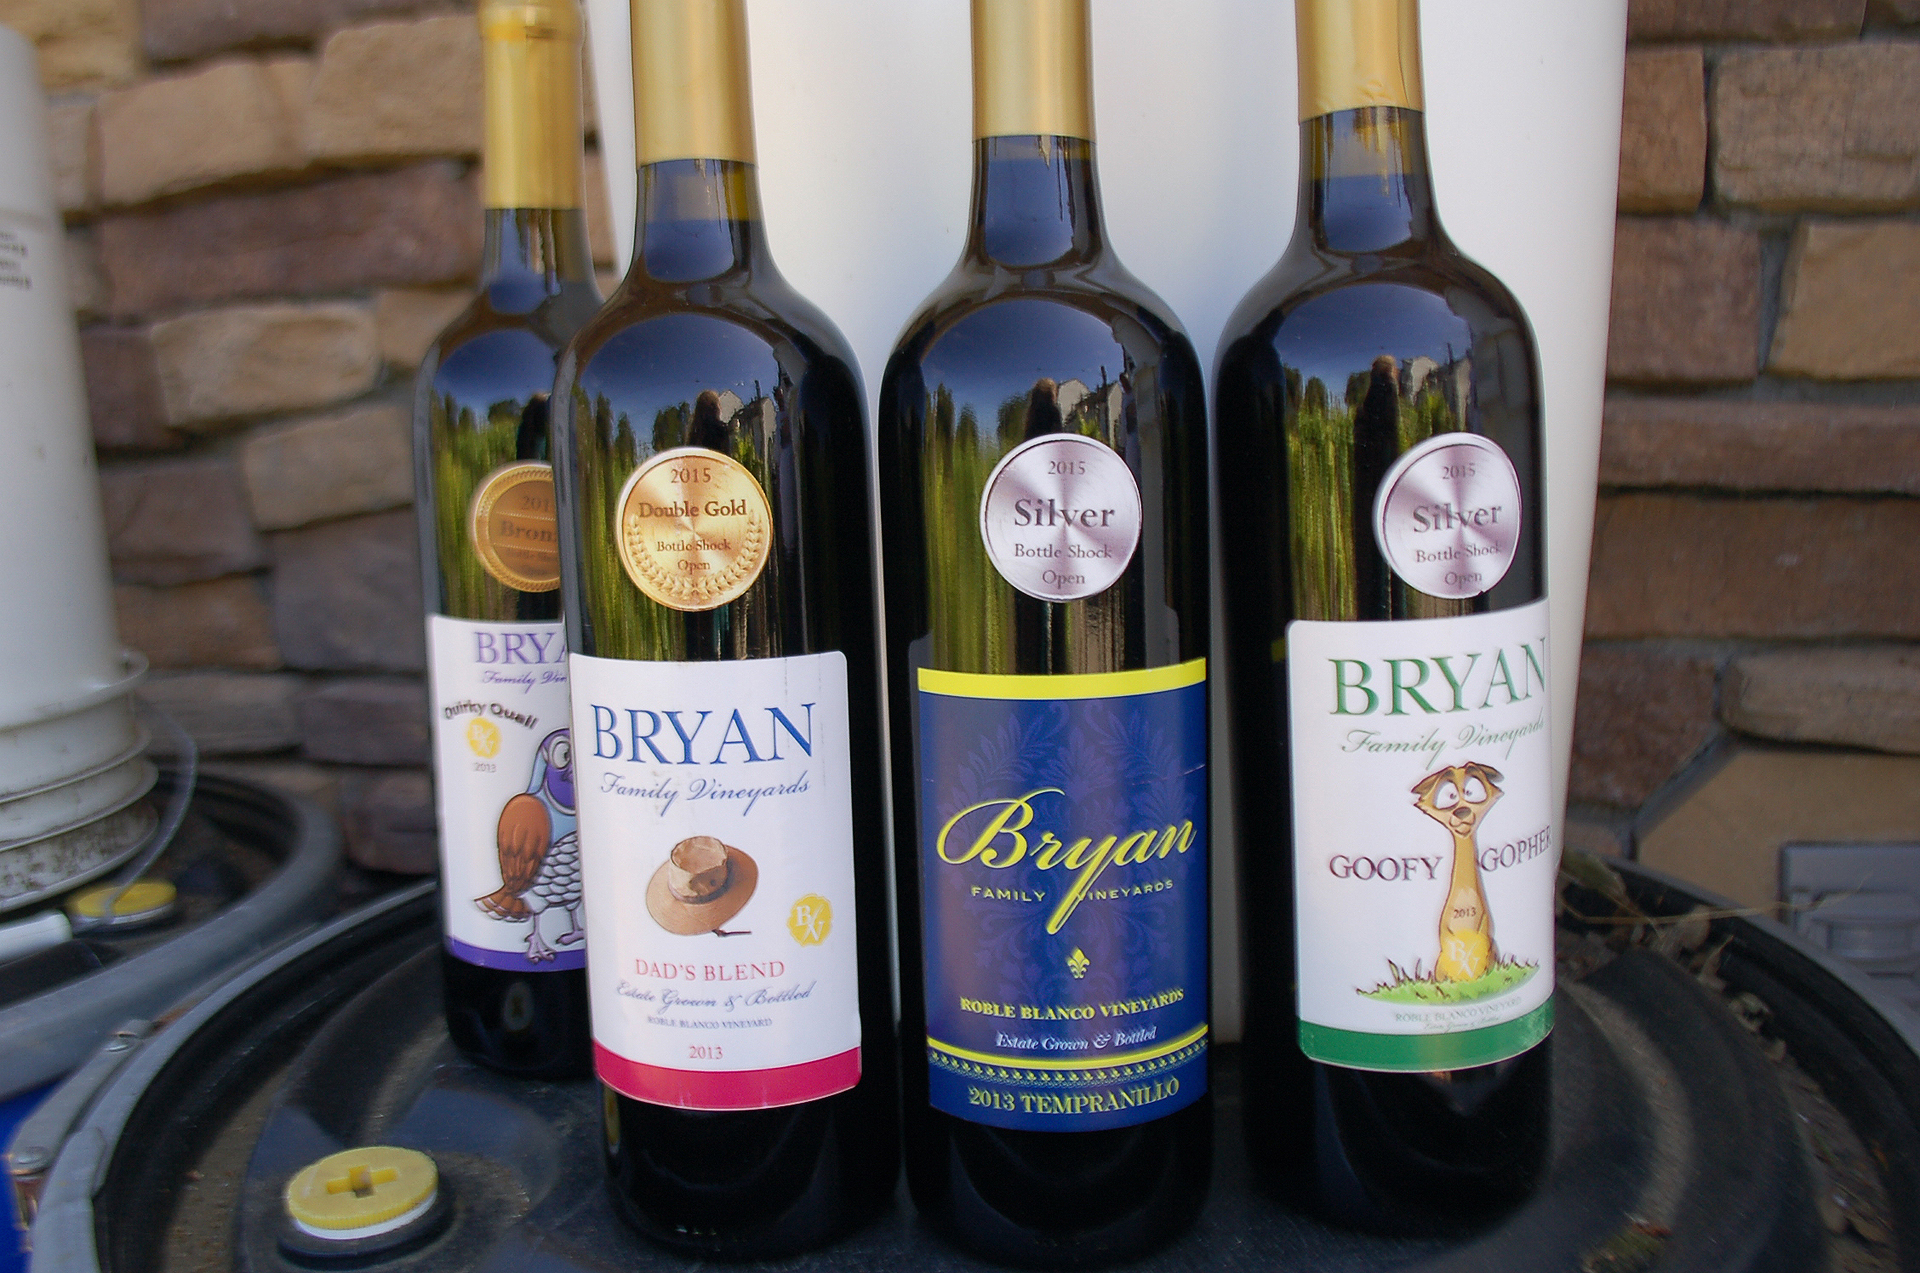 Scott Bryan's serious winemaking hobby has earned him medals at home winemaking competitions. His wines have humorous names like Goofy Gopher, Quirky Quail and Dad's Blend.